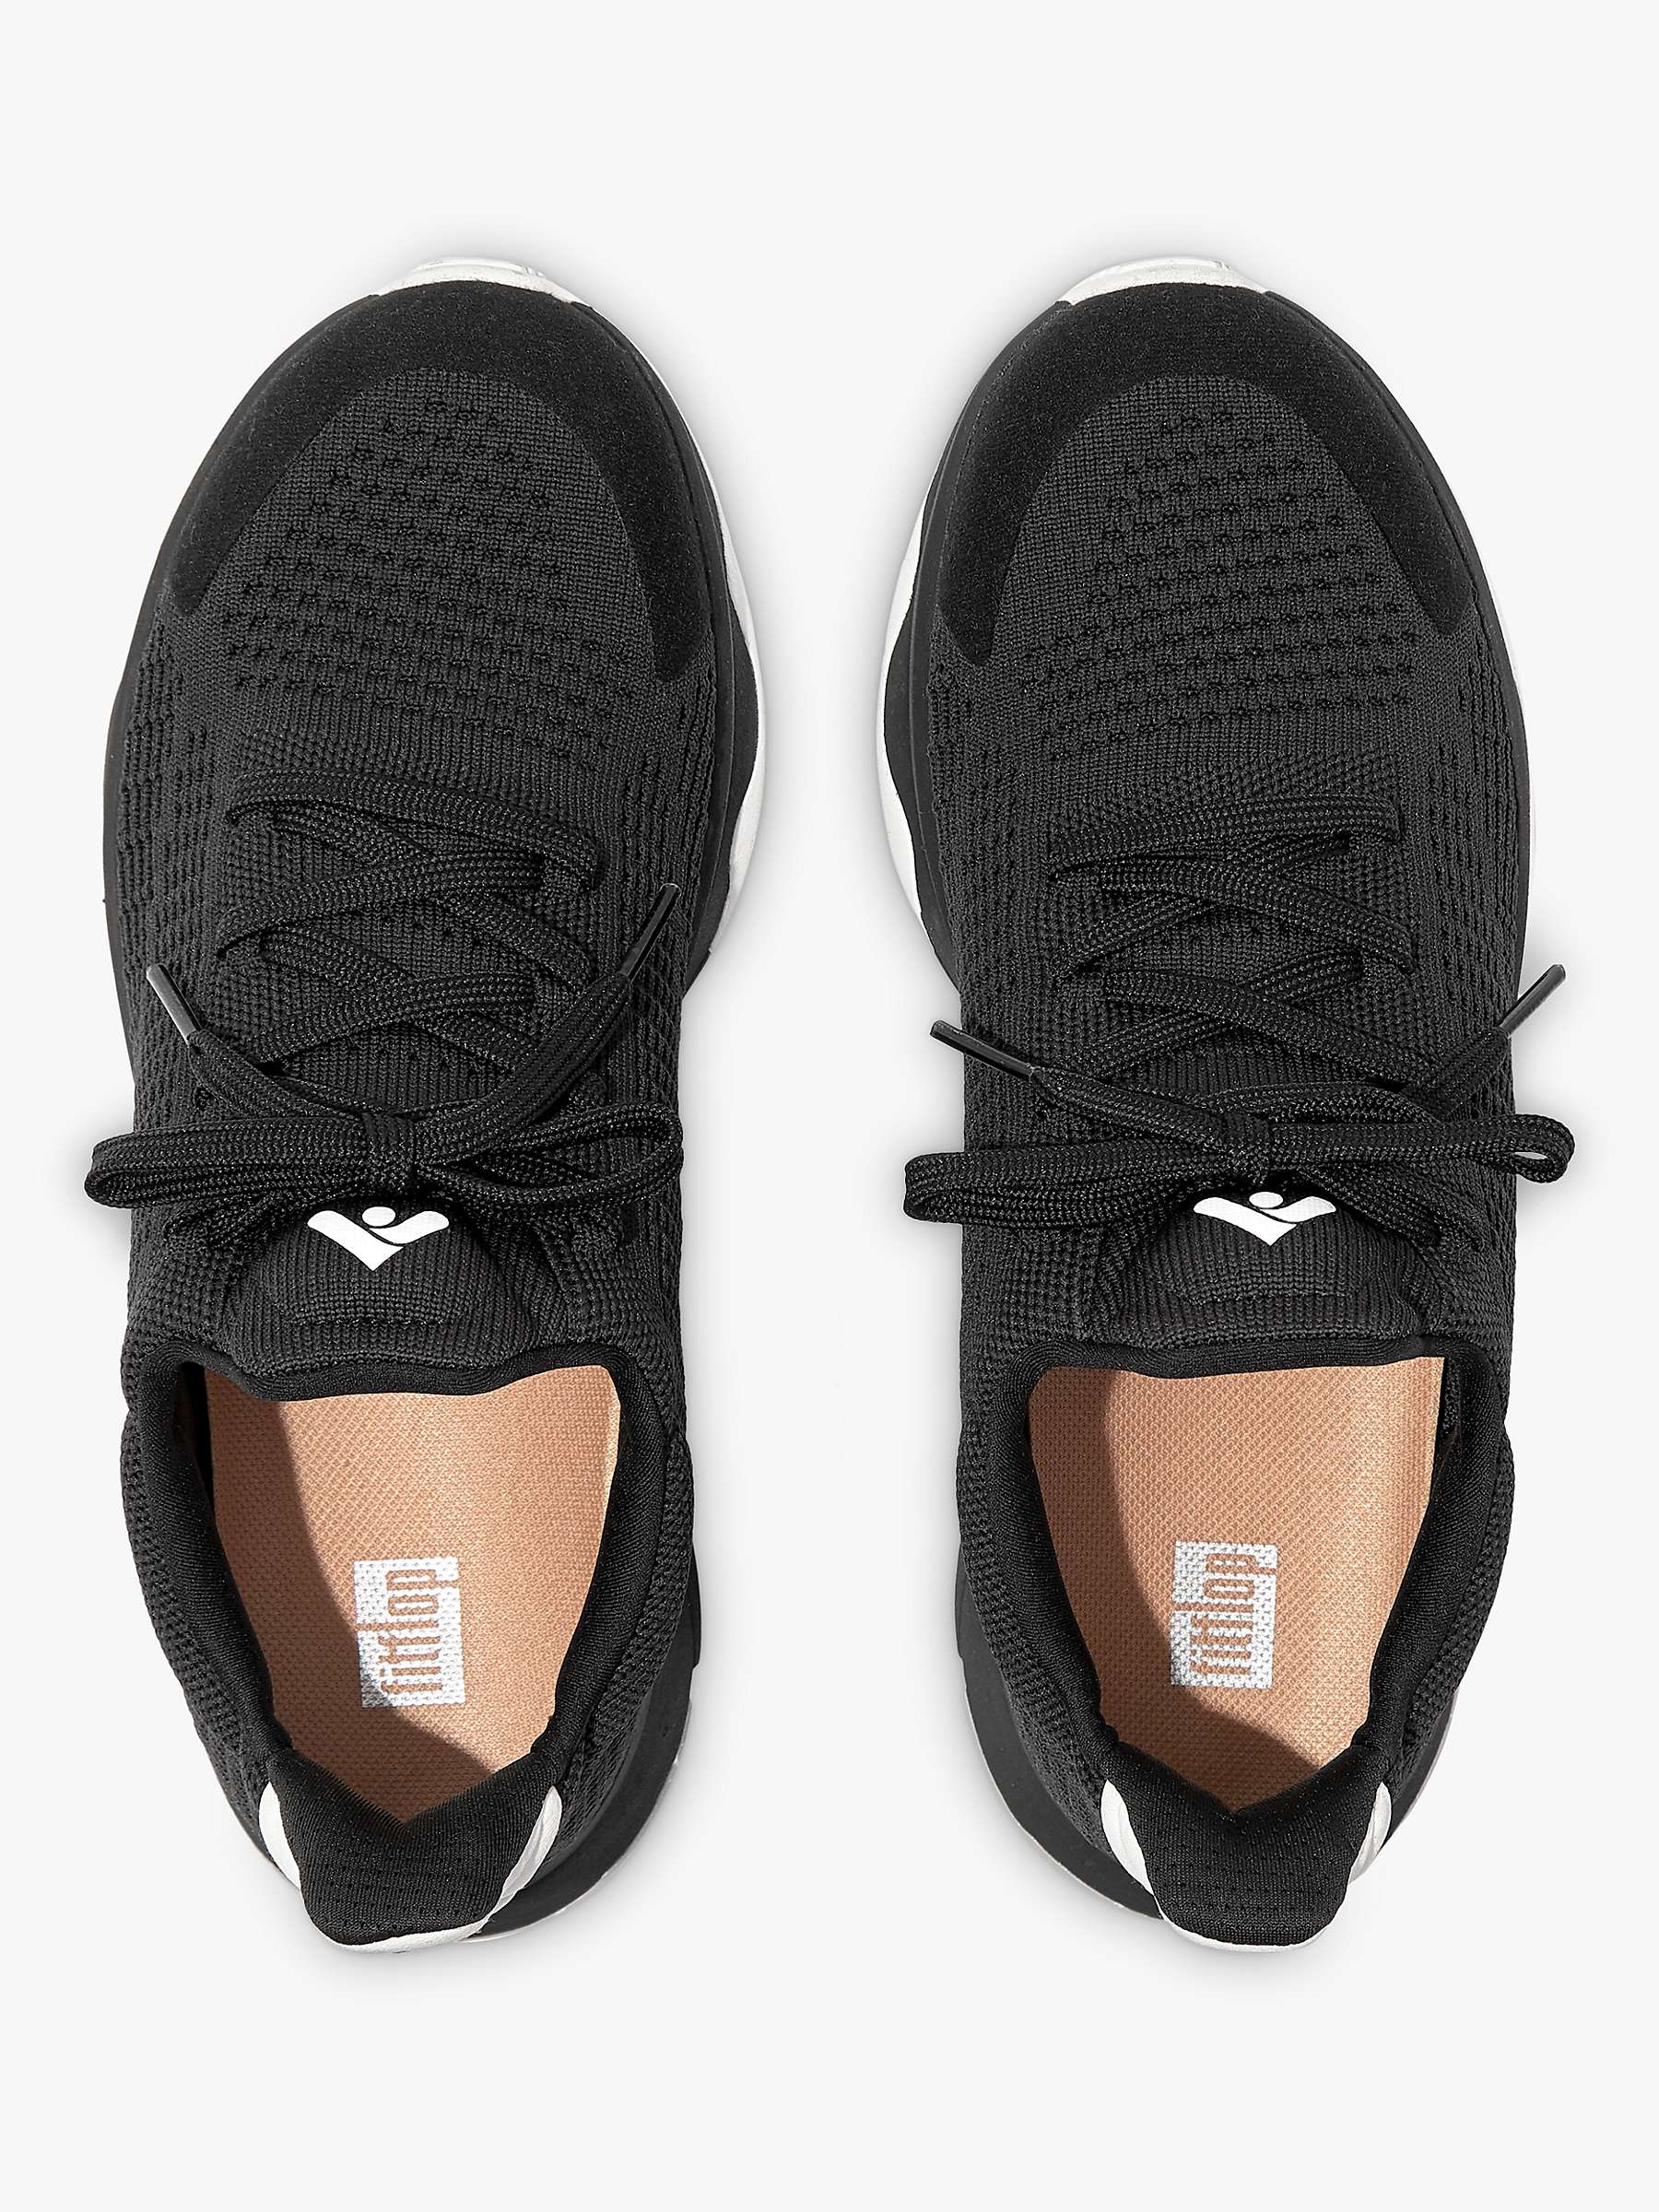 Buy FitFlop Vitamin FFX E01 Lace Up Trainers, Black Online at johnlewis.com